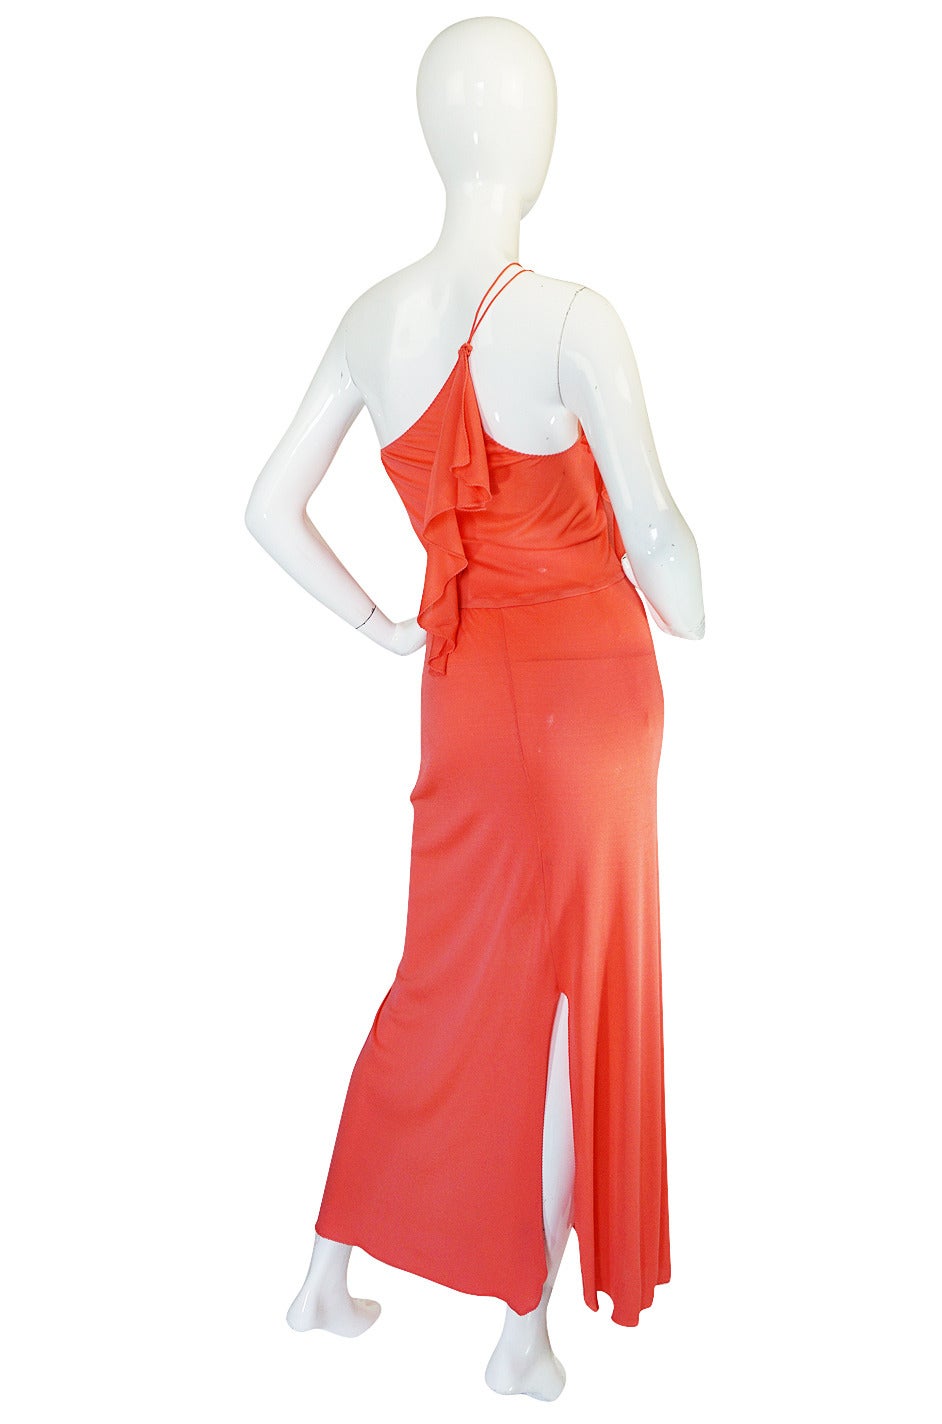 An amazing slinky and fluid jersey sheath in a bight coral jersey that skims over the body and is cut to emphasize every curve. It is long and lean with a trailing ruffled detail that gives it lots of movement. The dress is cut on the bias so it